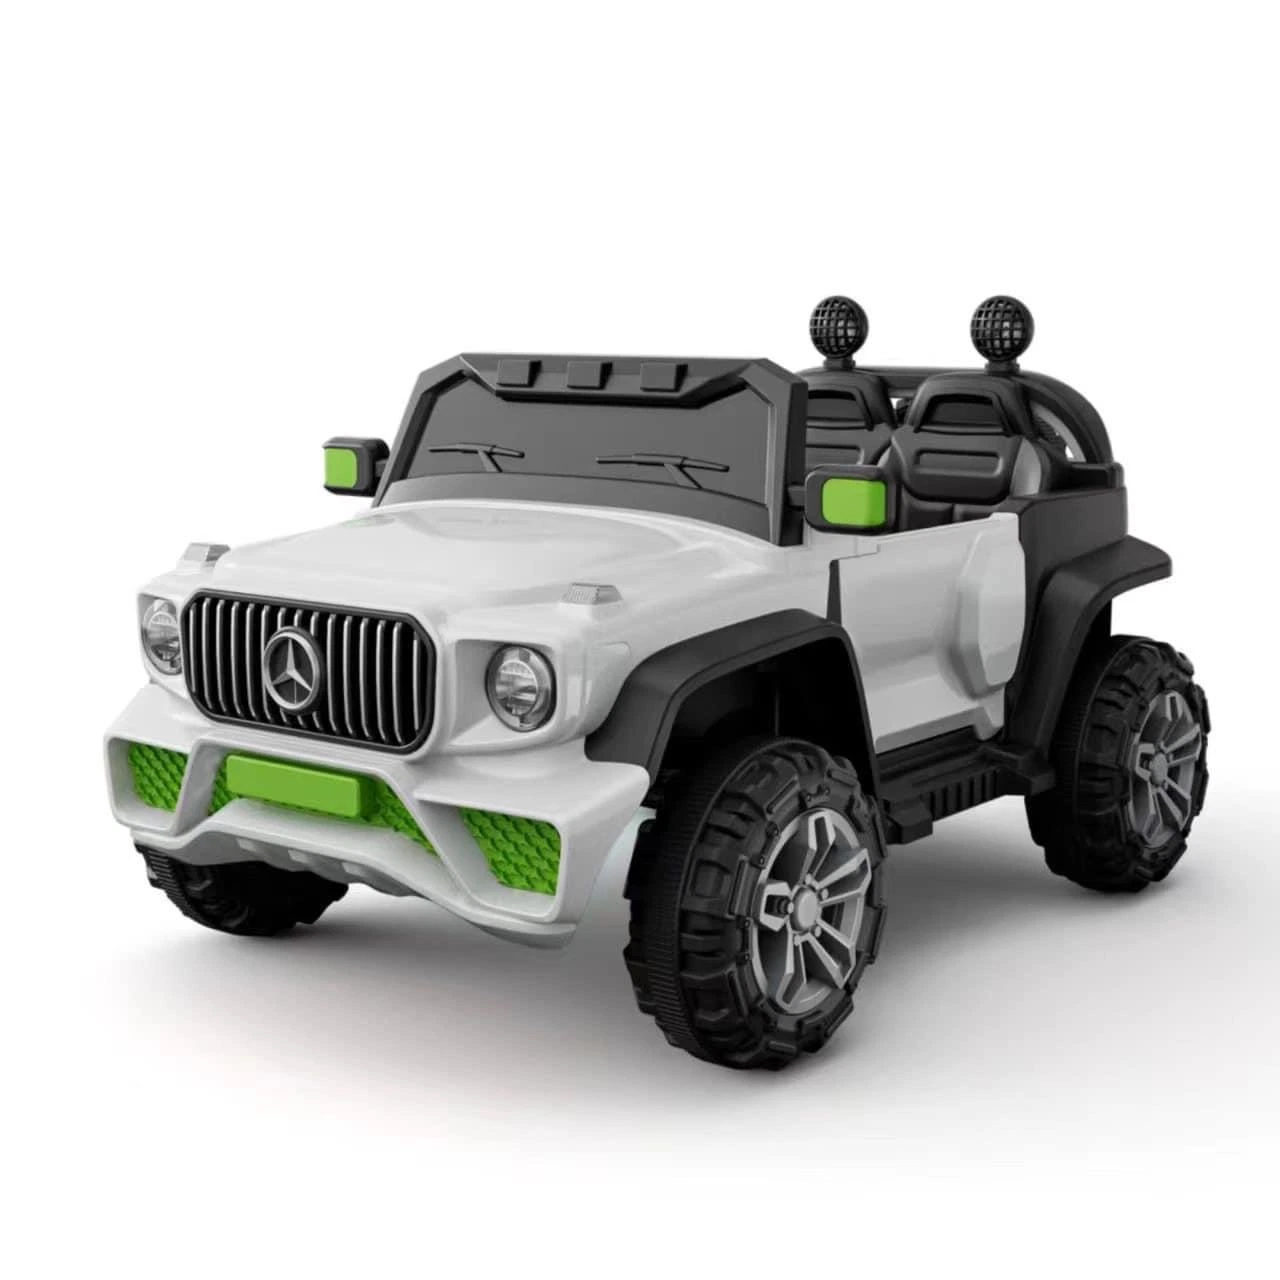 Wholesale/Supplier China Electric Toy Cars for Children, Battery Operated Ride Ons, Rechargeable Jeep Car